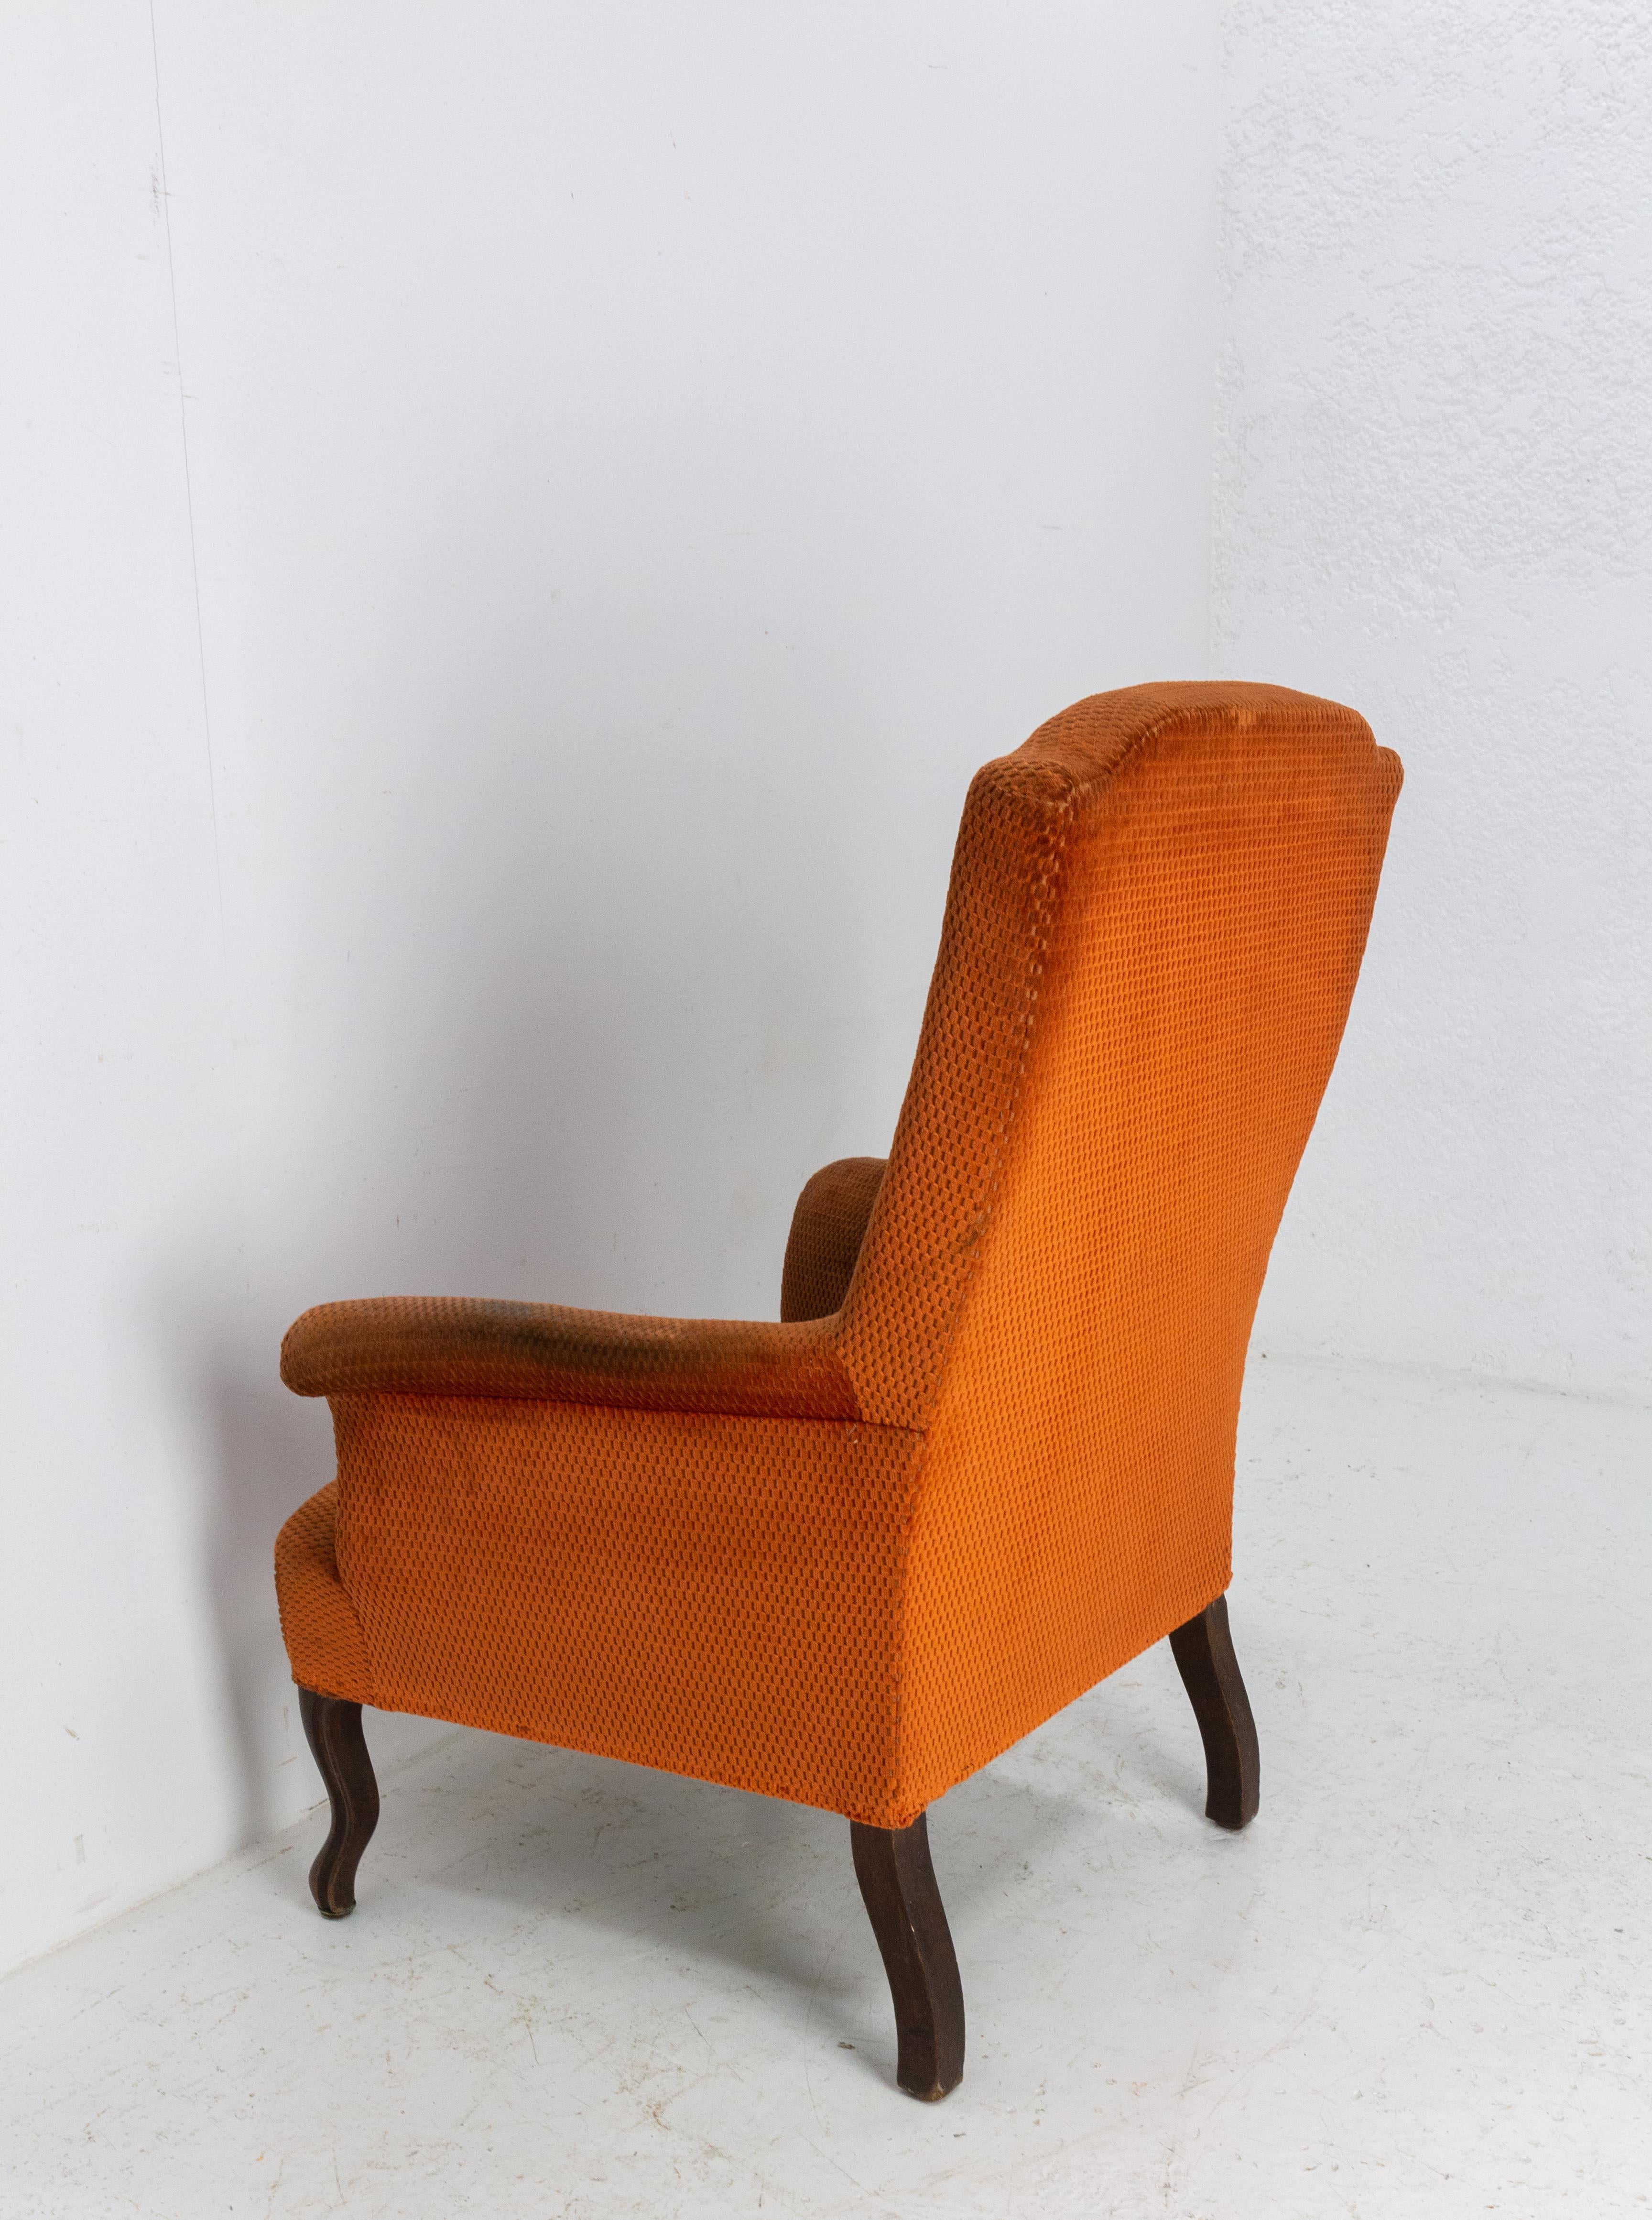 Late 19th Century Antique Armchair Fauteuil Napoleon III Upholstery and Walnut French 19th Century For Sale